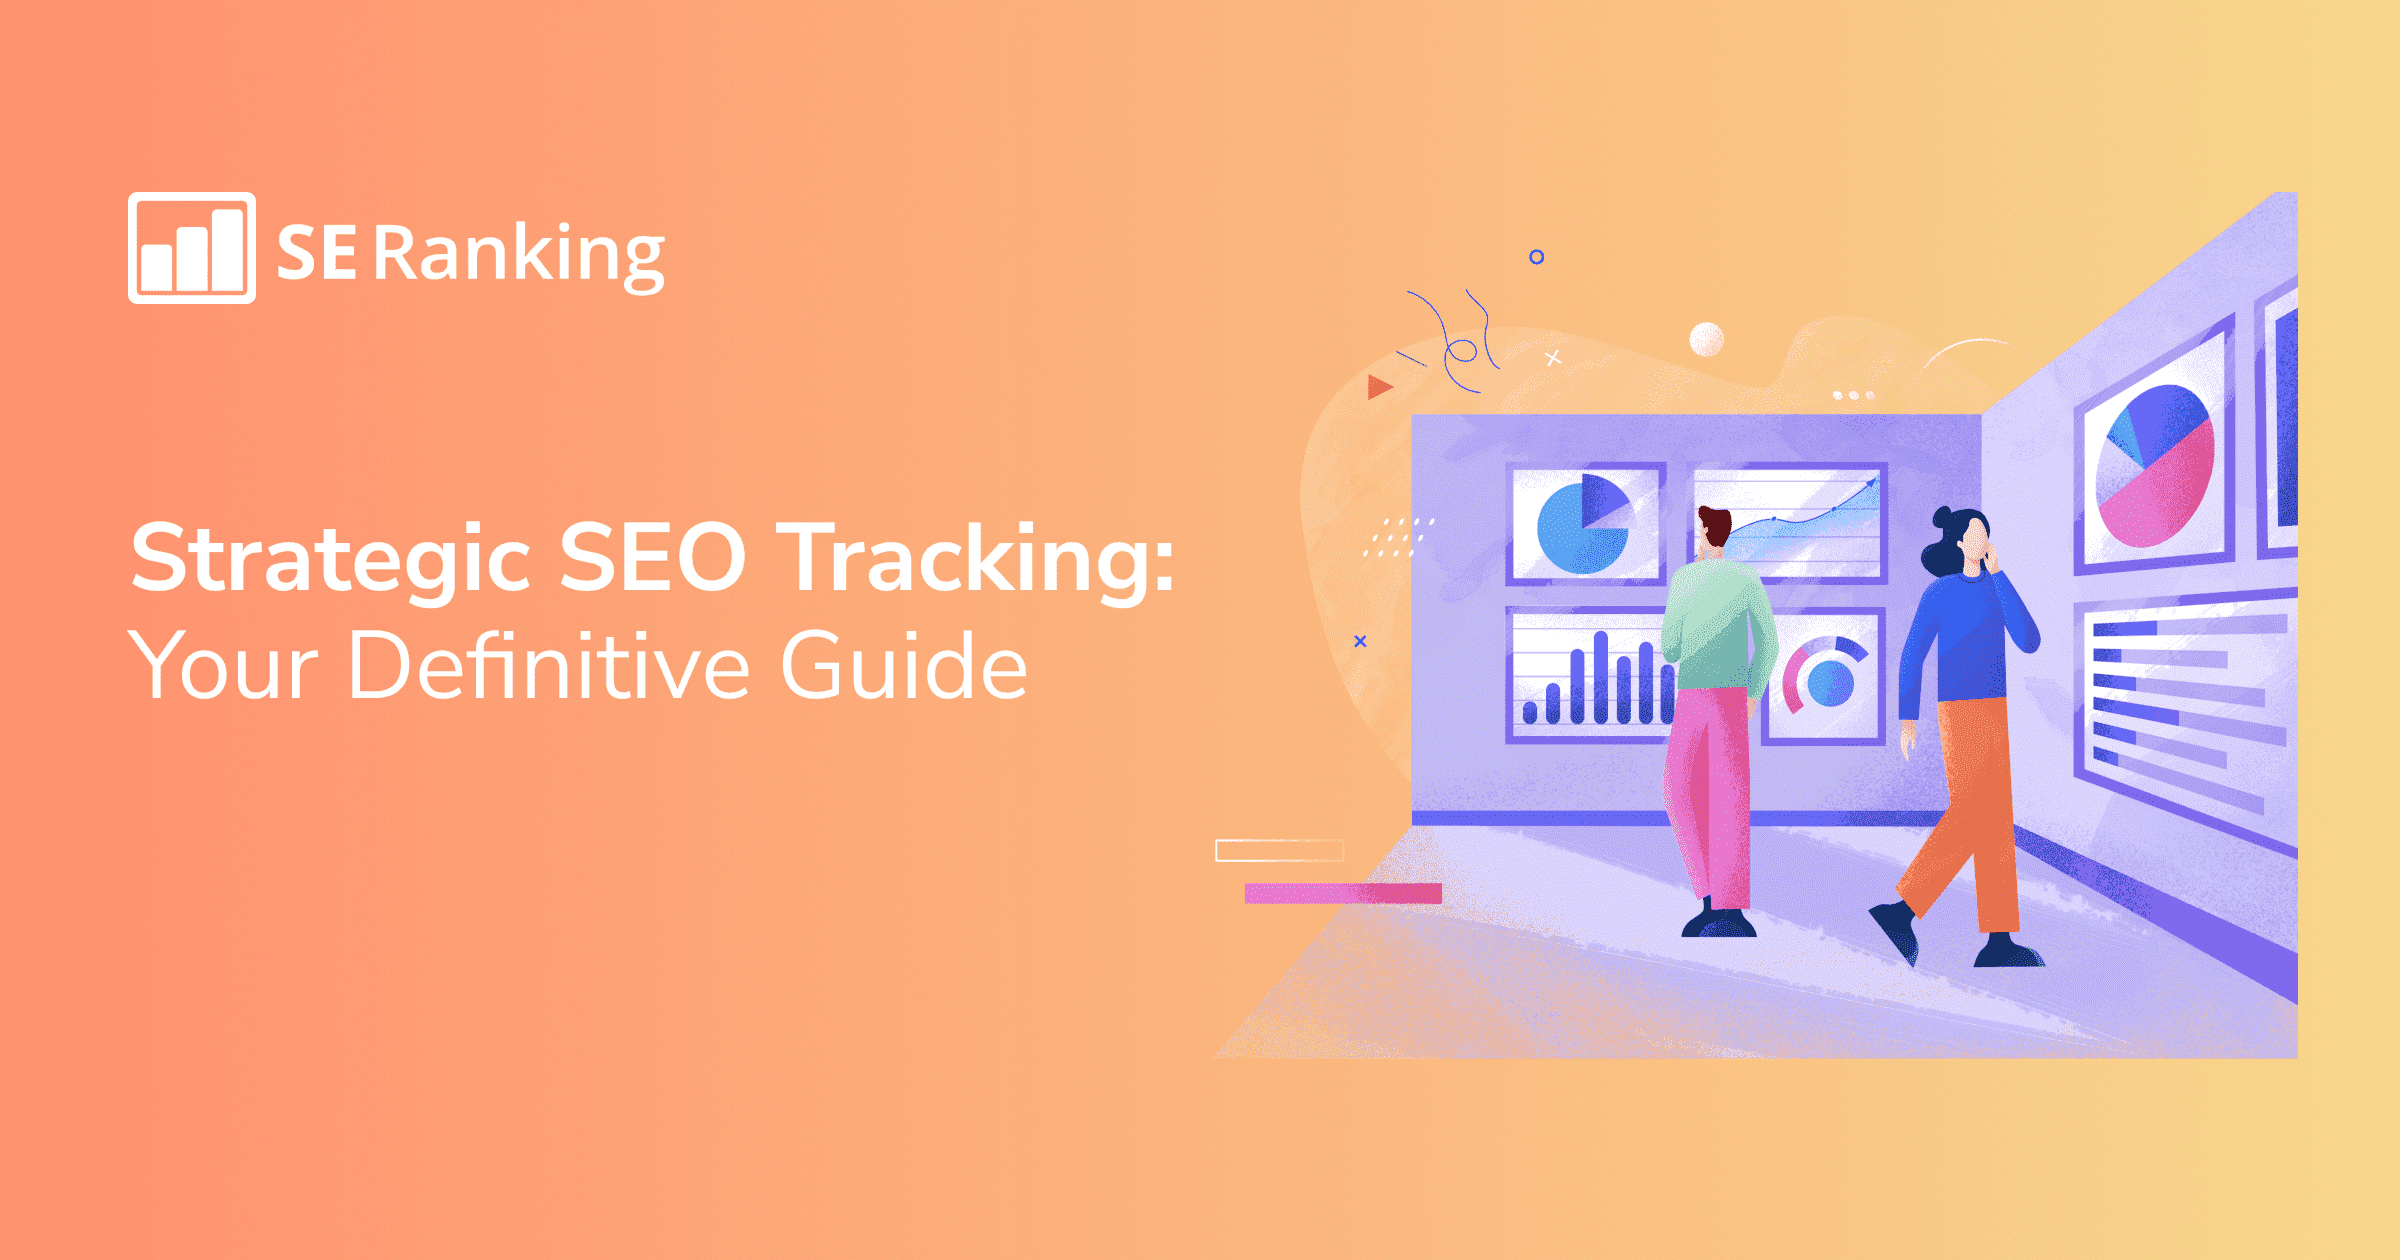 SEO Tracking: Tips and Tools to Monitor Your SEO Progress